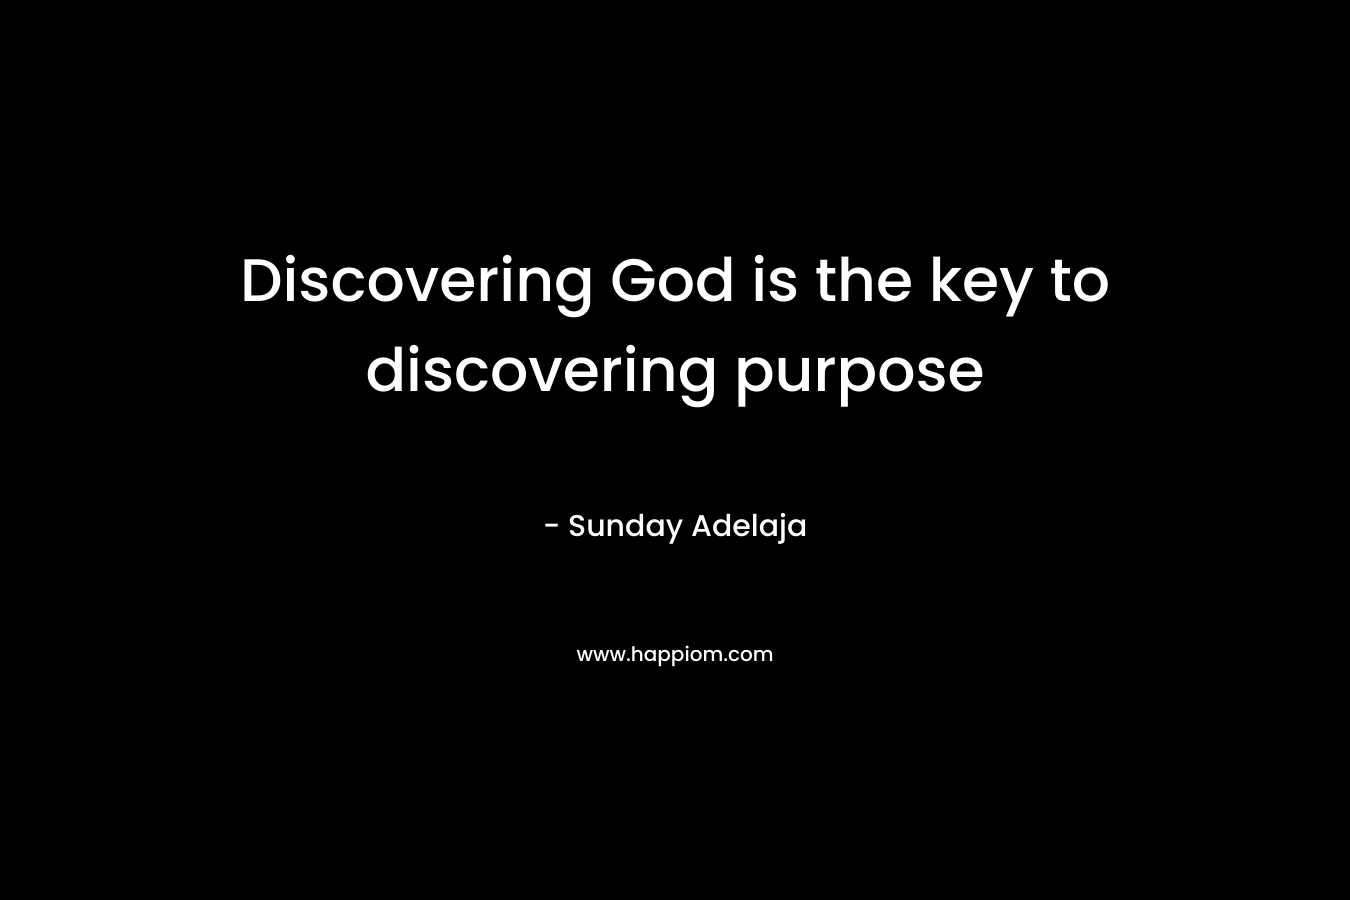 Discovering God is the key to discovering purpose